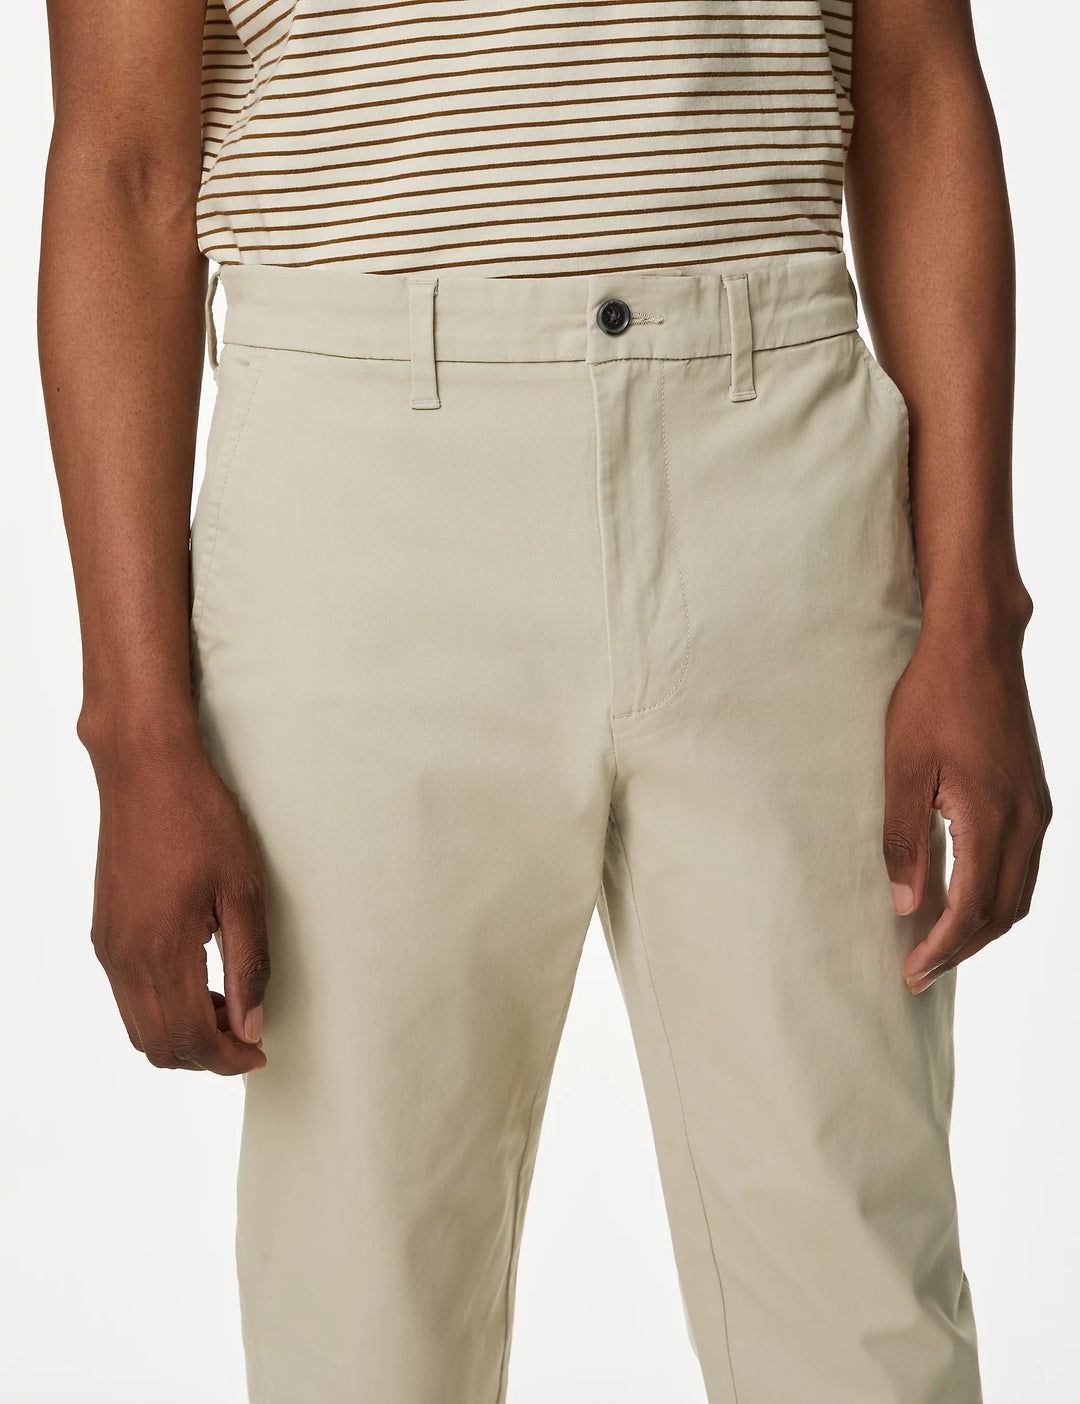 M&S Mens Cotton Chinos T17/6613